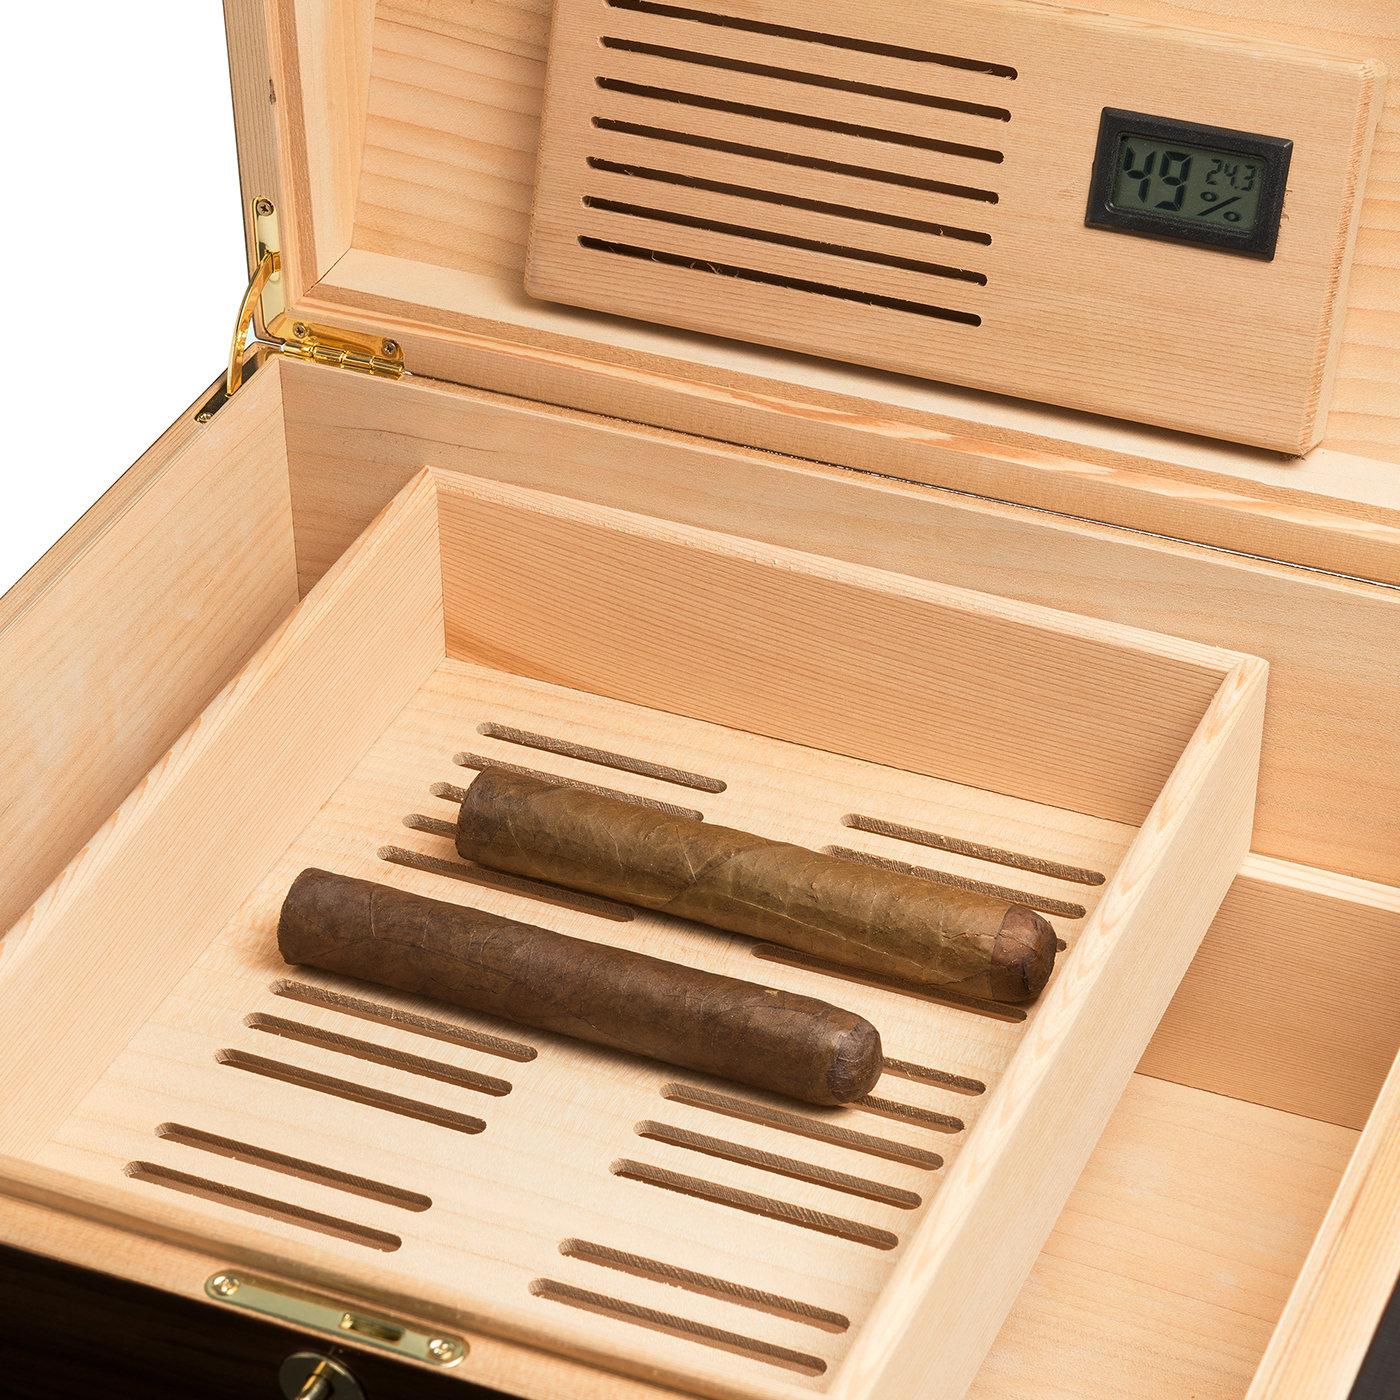 An elegant and refined collector's piece, this cigar case will add an accent of sophisticated flair to any modern or traditional interior. The perfect gift for a cigar lover, it flaunts a classic silhouette handcrafted of cedarwood, venereed in